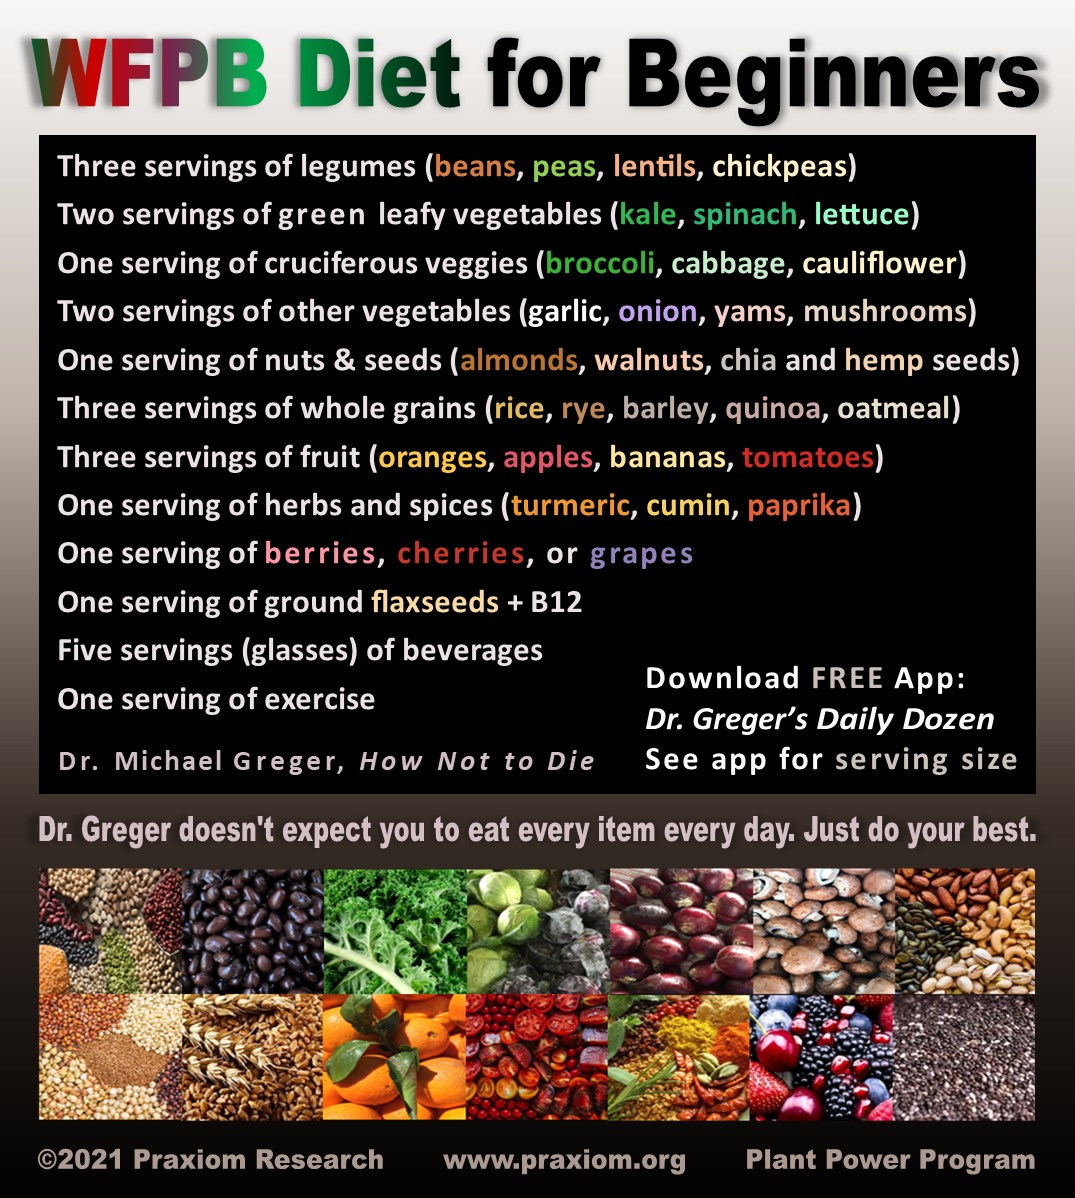 Dr.
          Greger's Whole Food Plant Based (WFPB) Diet for Beginners